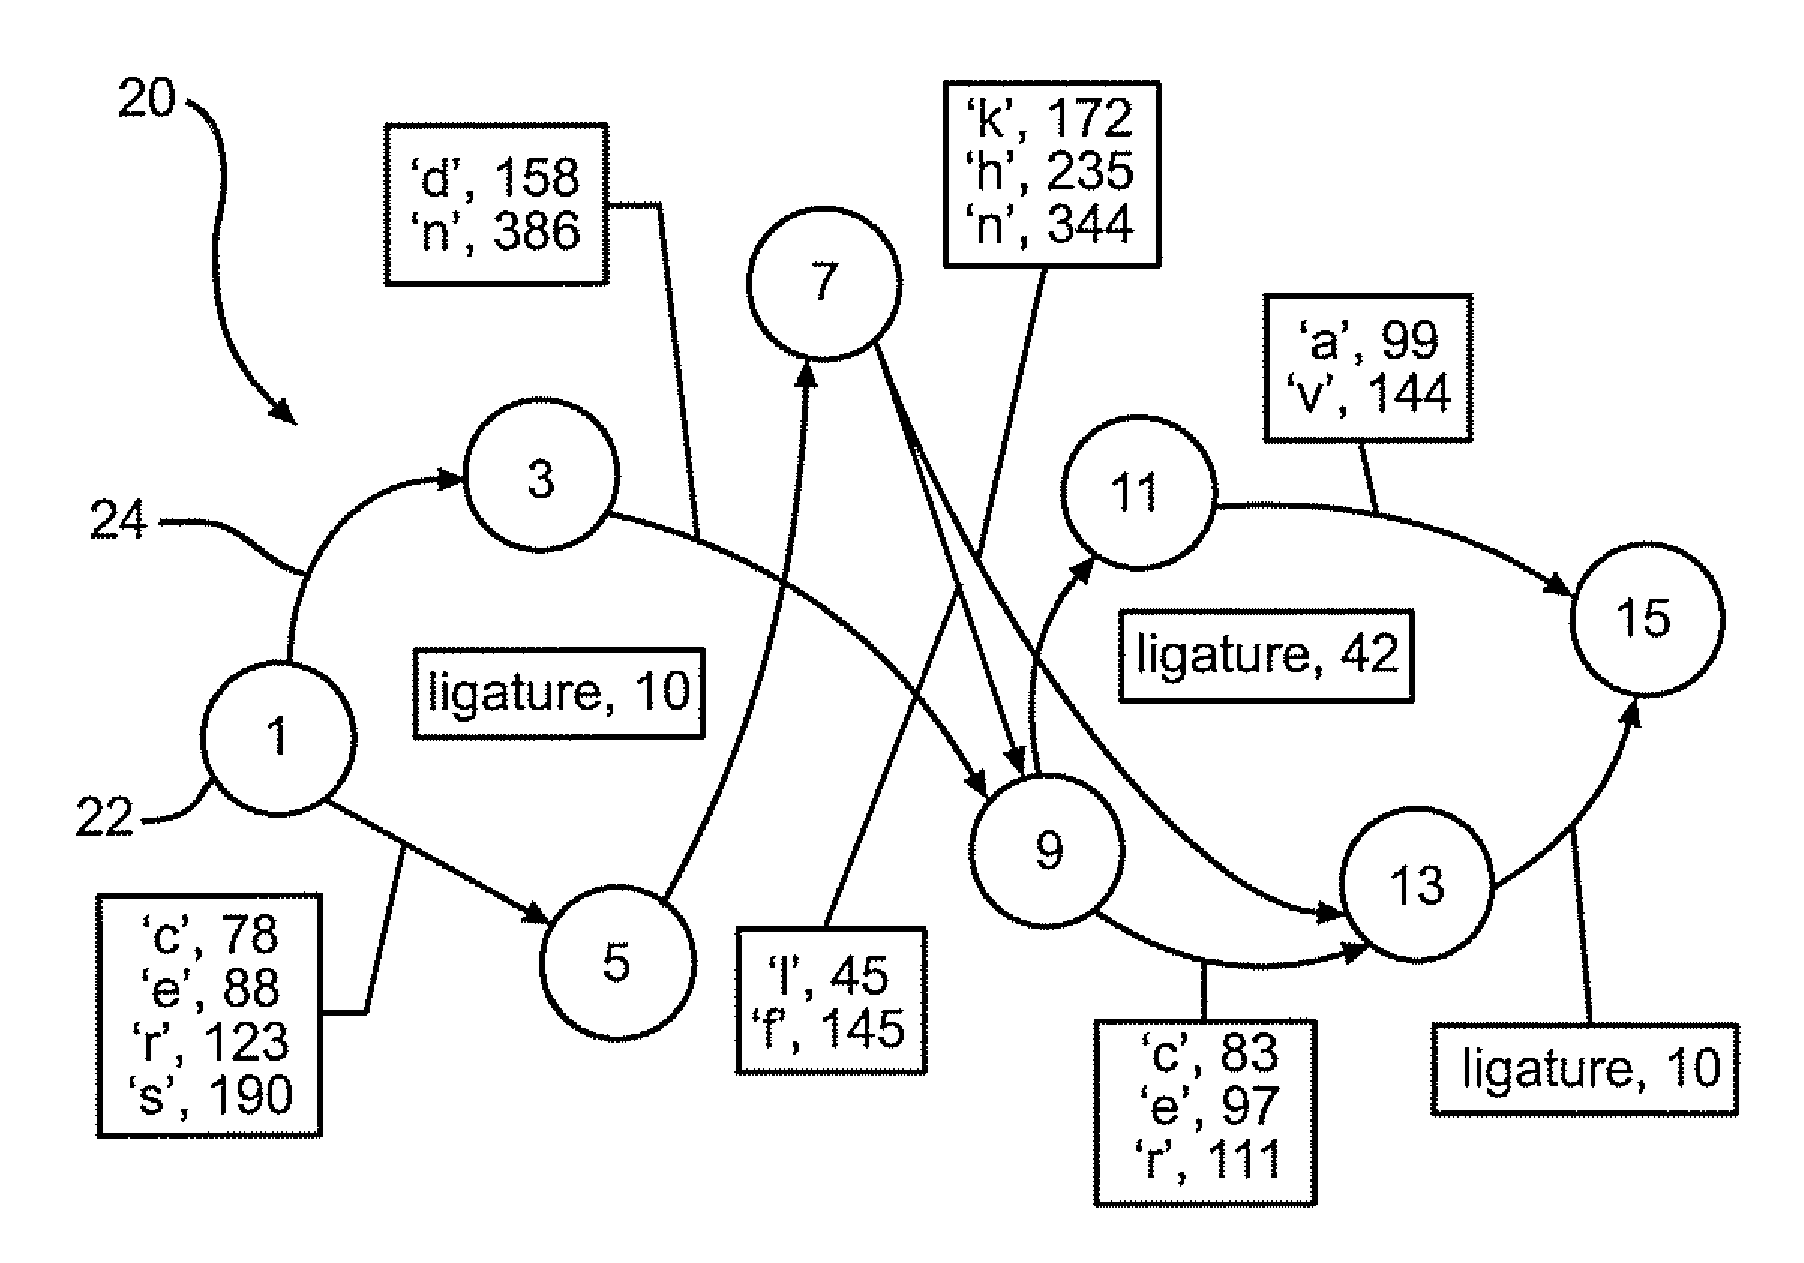 Handwriting recognition using a graph of segmentation candidates and dictionary search